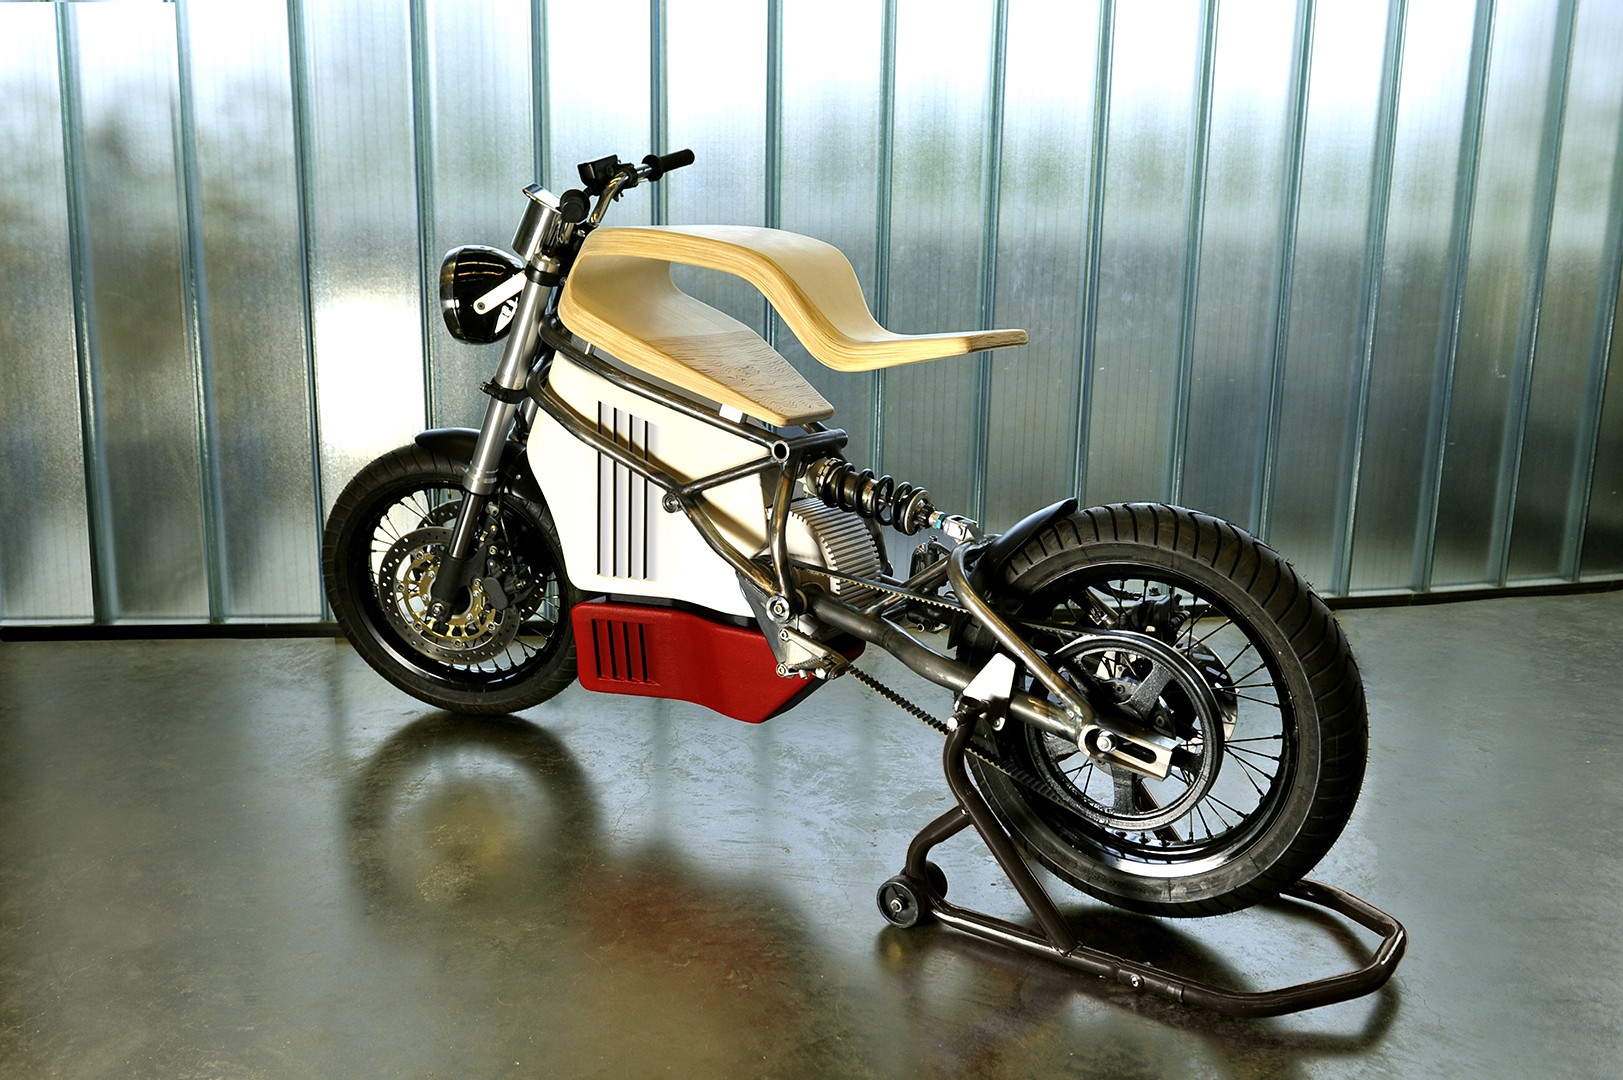 E-Raw Is an Electric Cafe-Racer Prototype with a Truly Raw ...